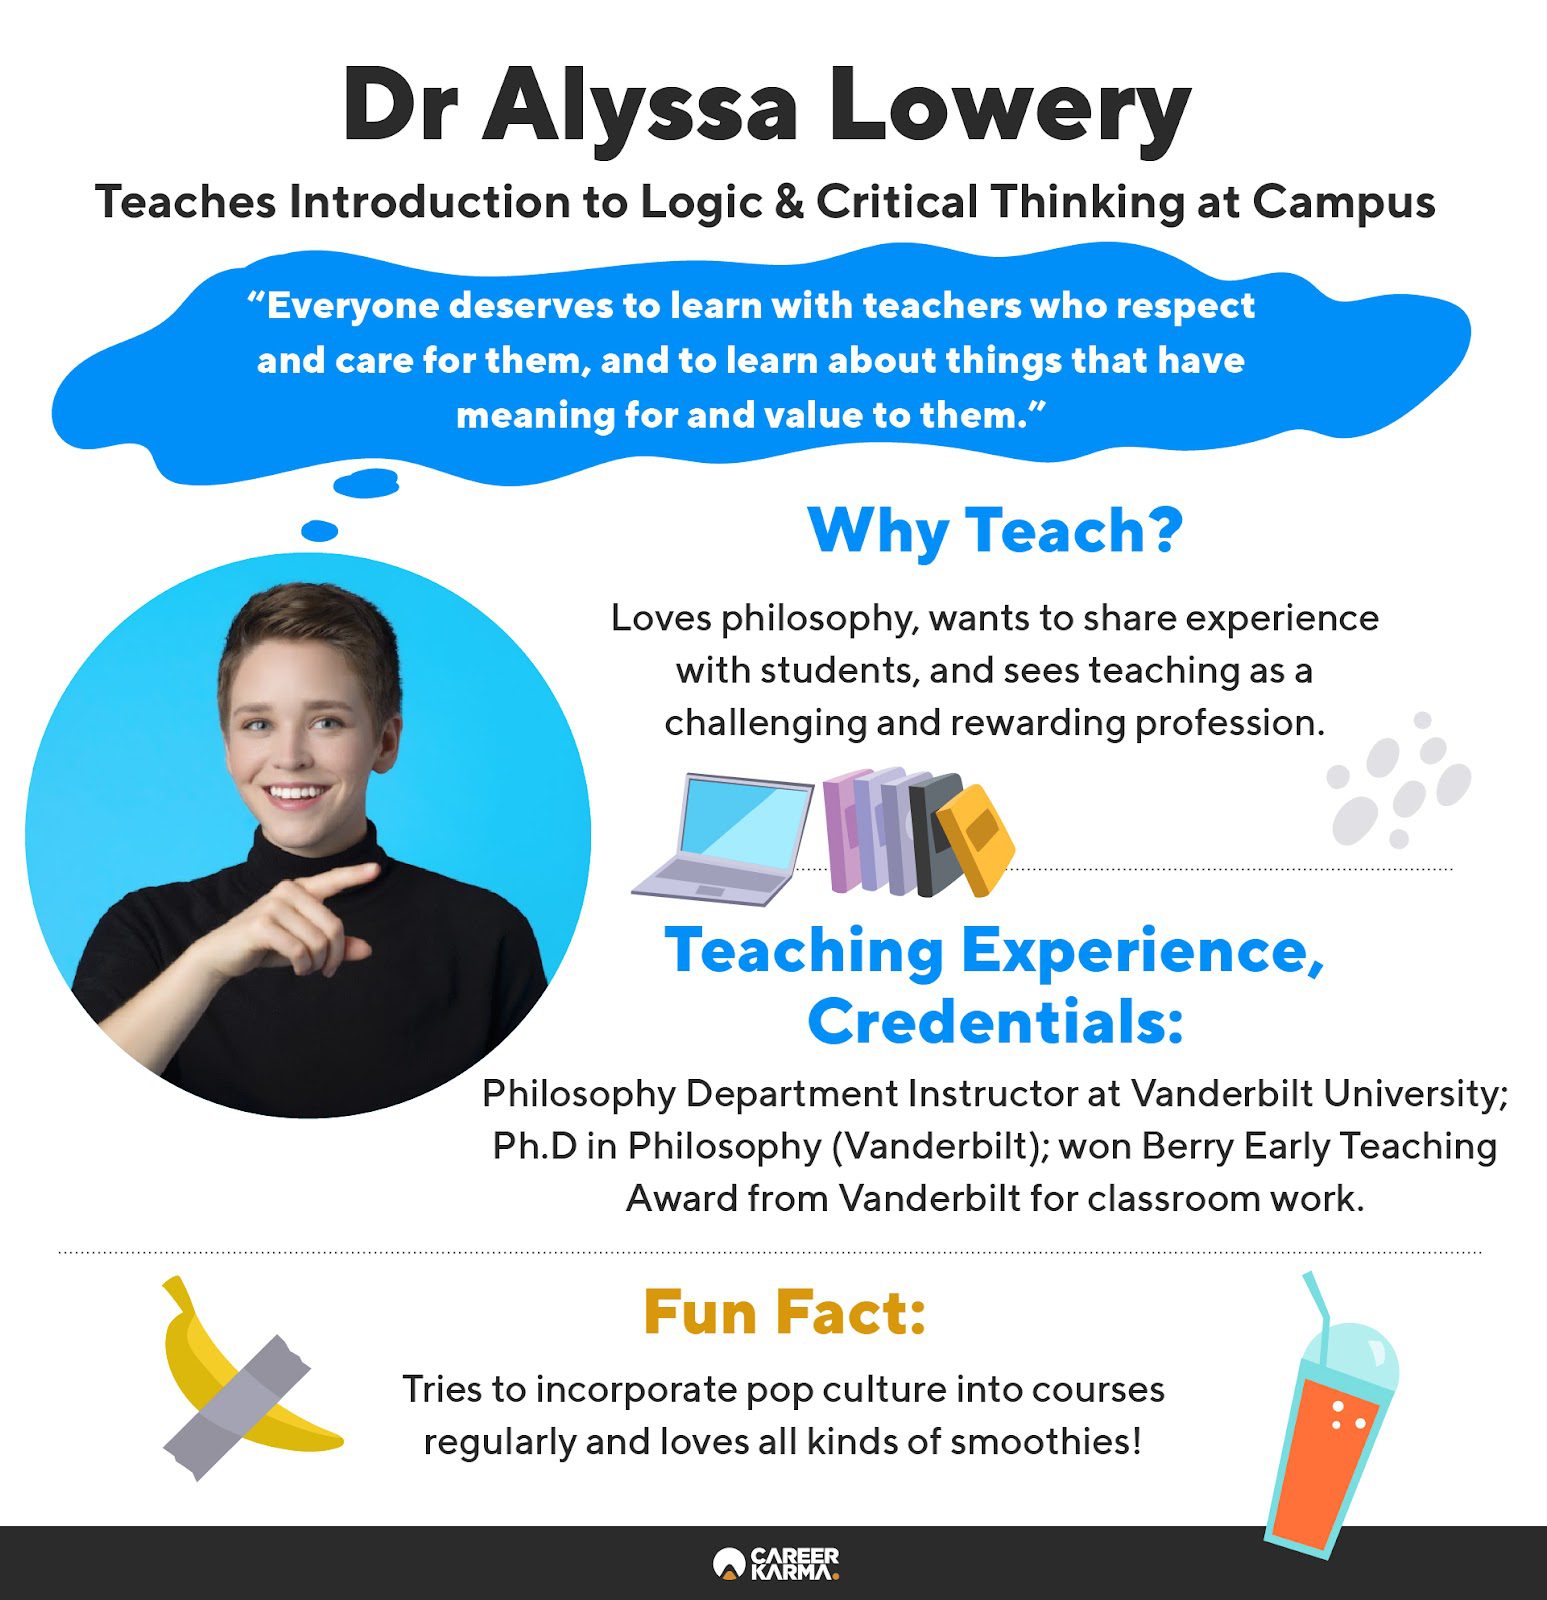 An infographic featuring Dr. Alyssa Lowery’s profile